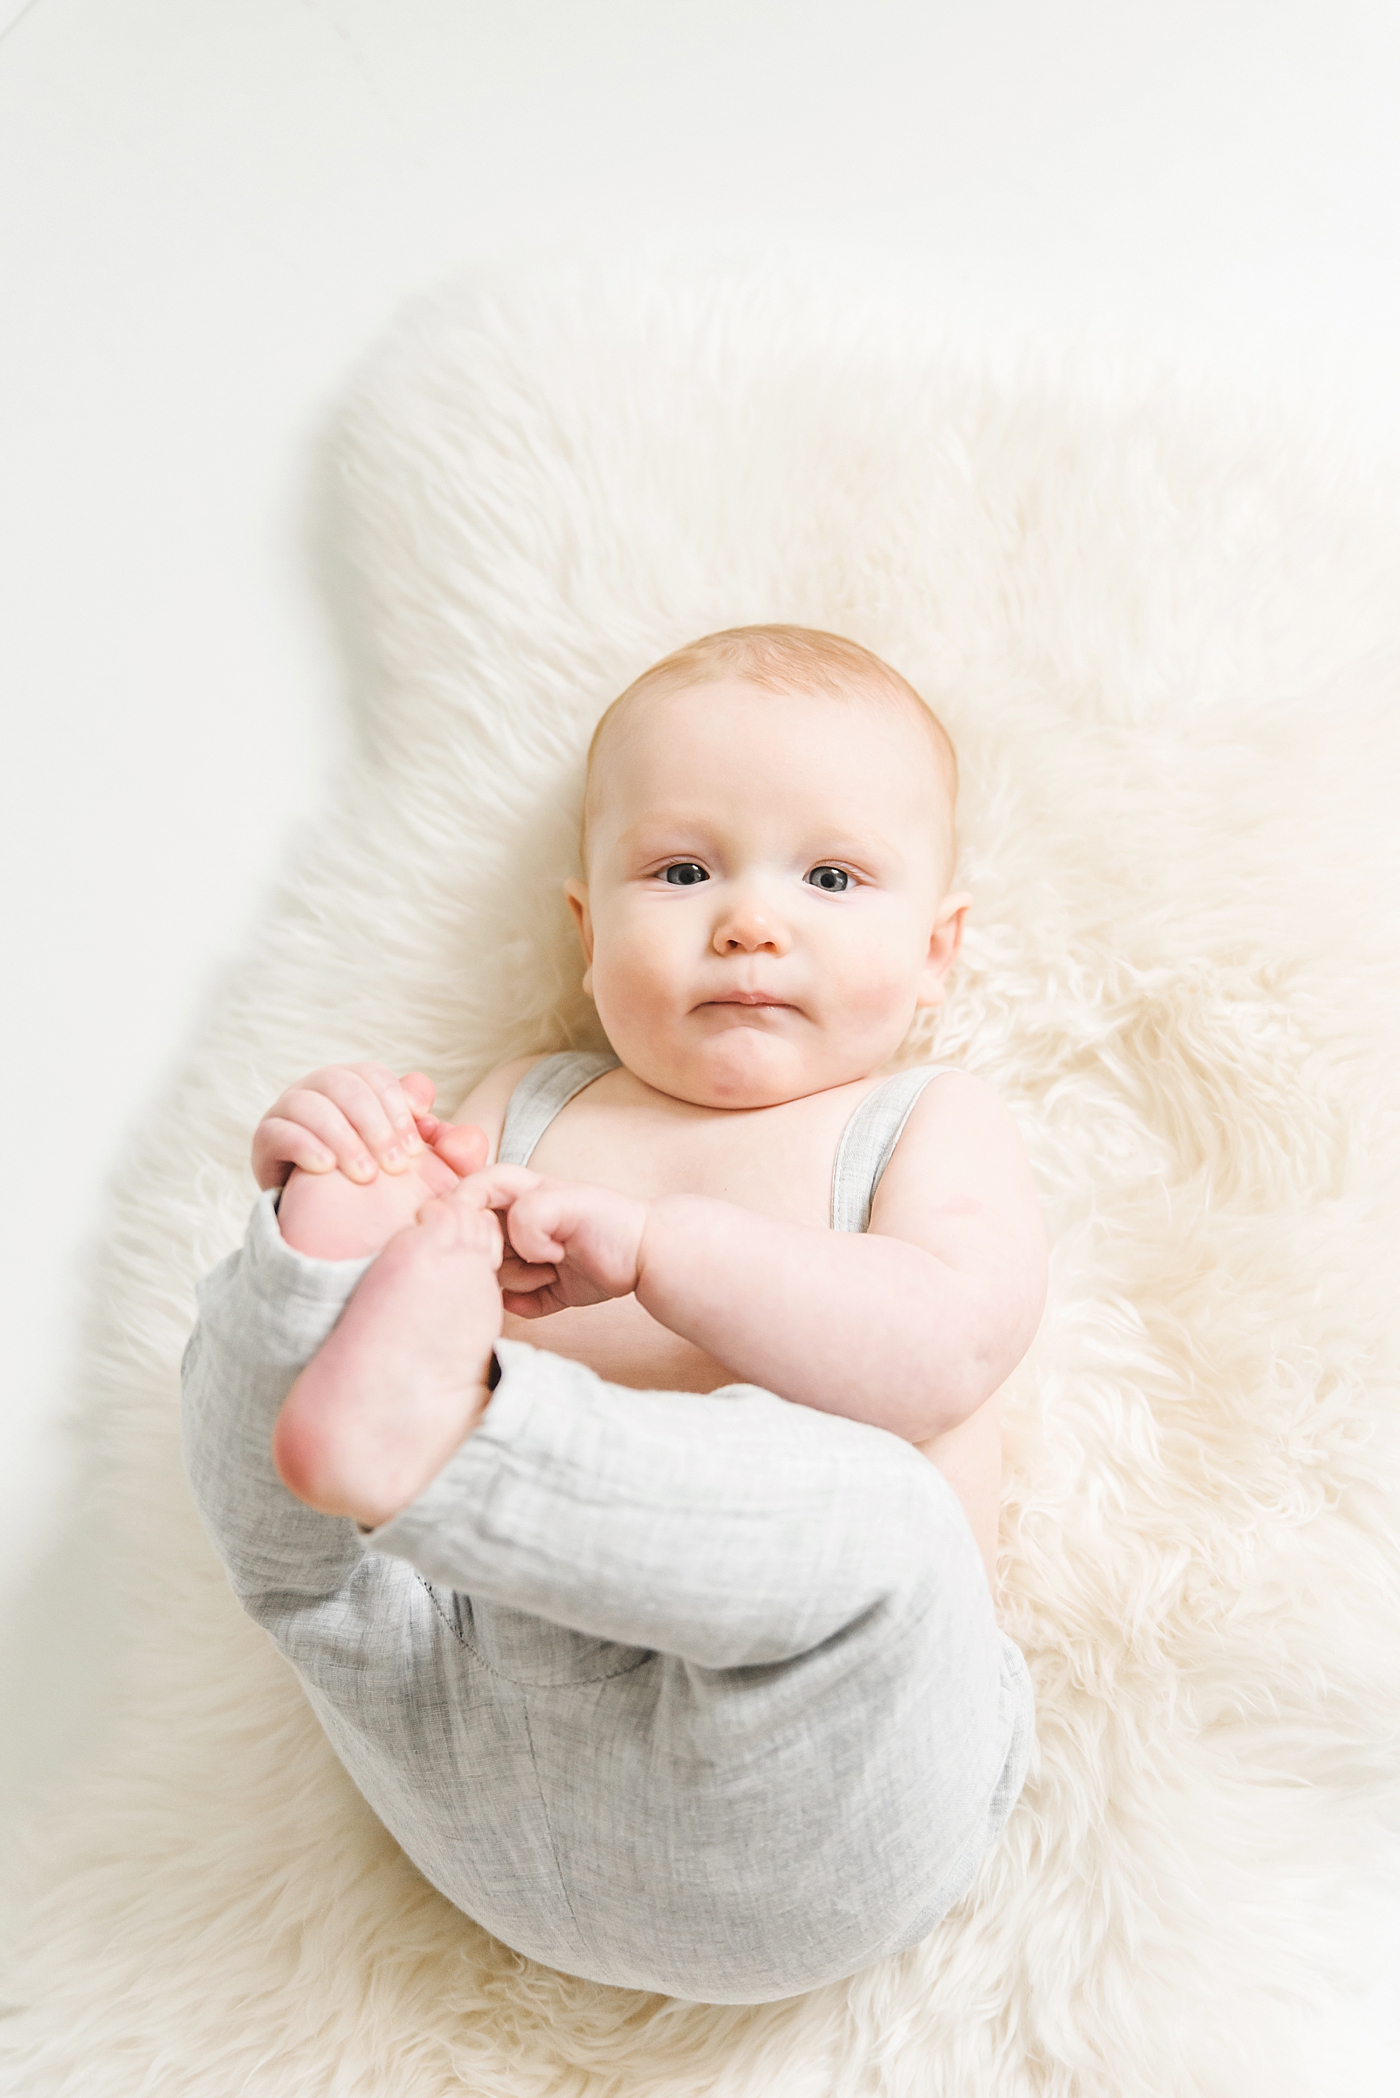 Blue eyed baby boy playing with his foot | Photo by Anna Wisjo Photography 